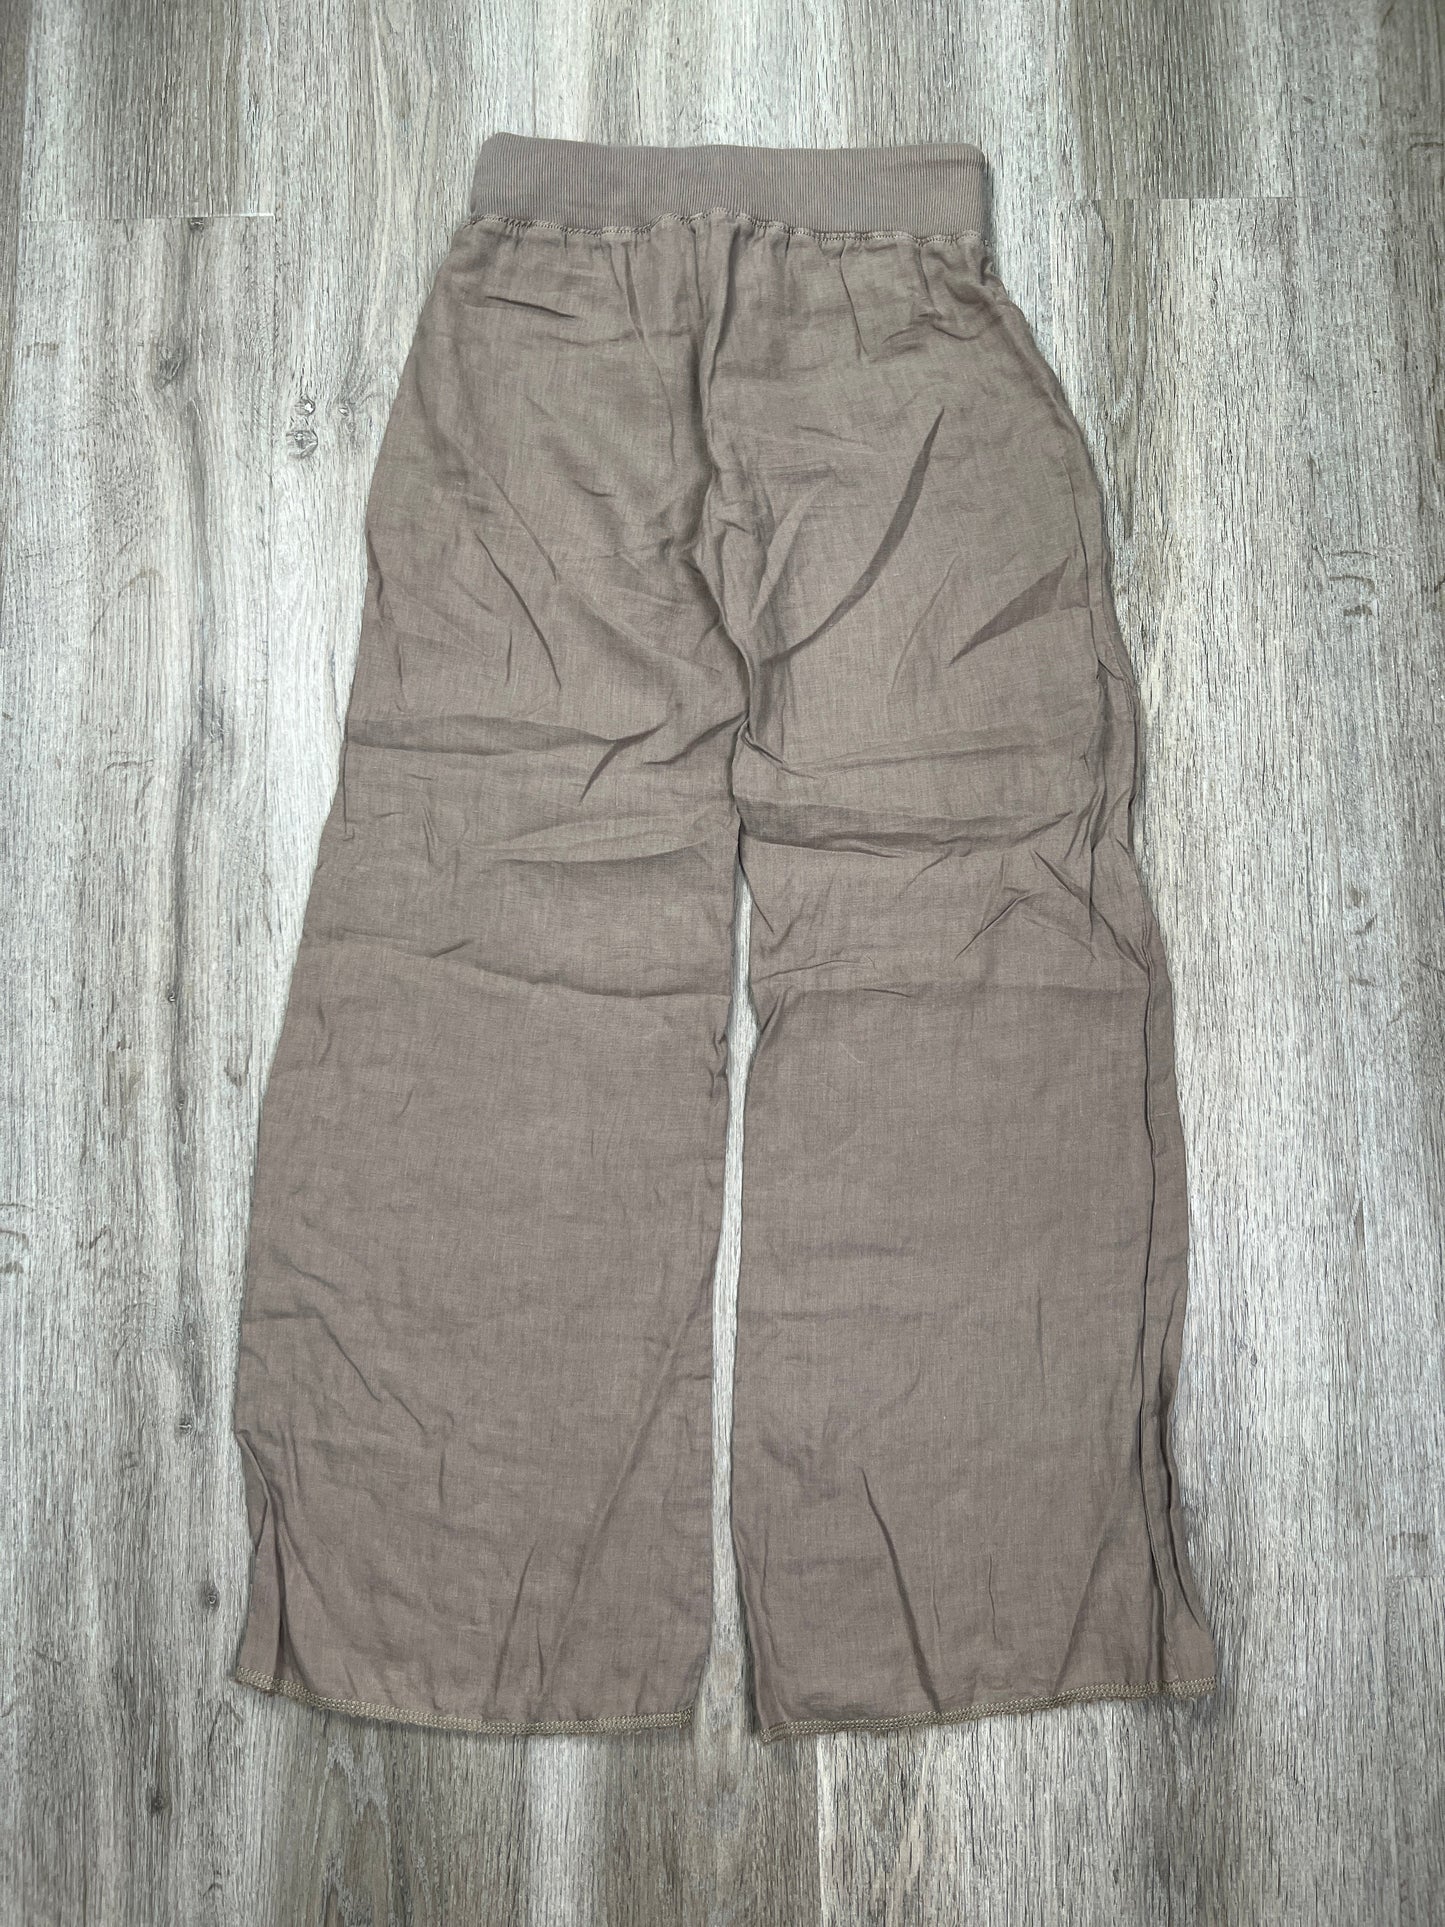 Brown Pants Linen Lucky Brand, Size S